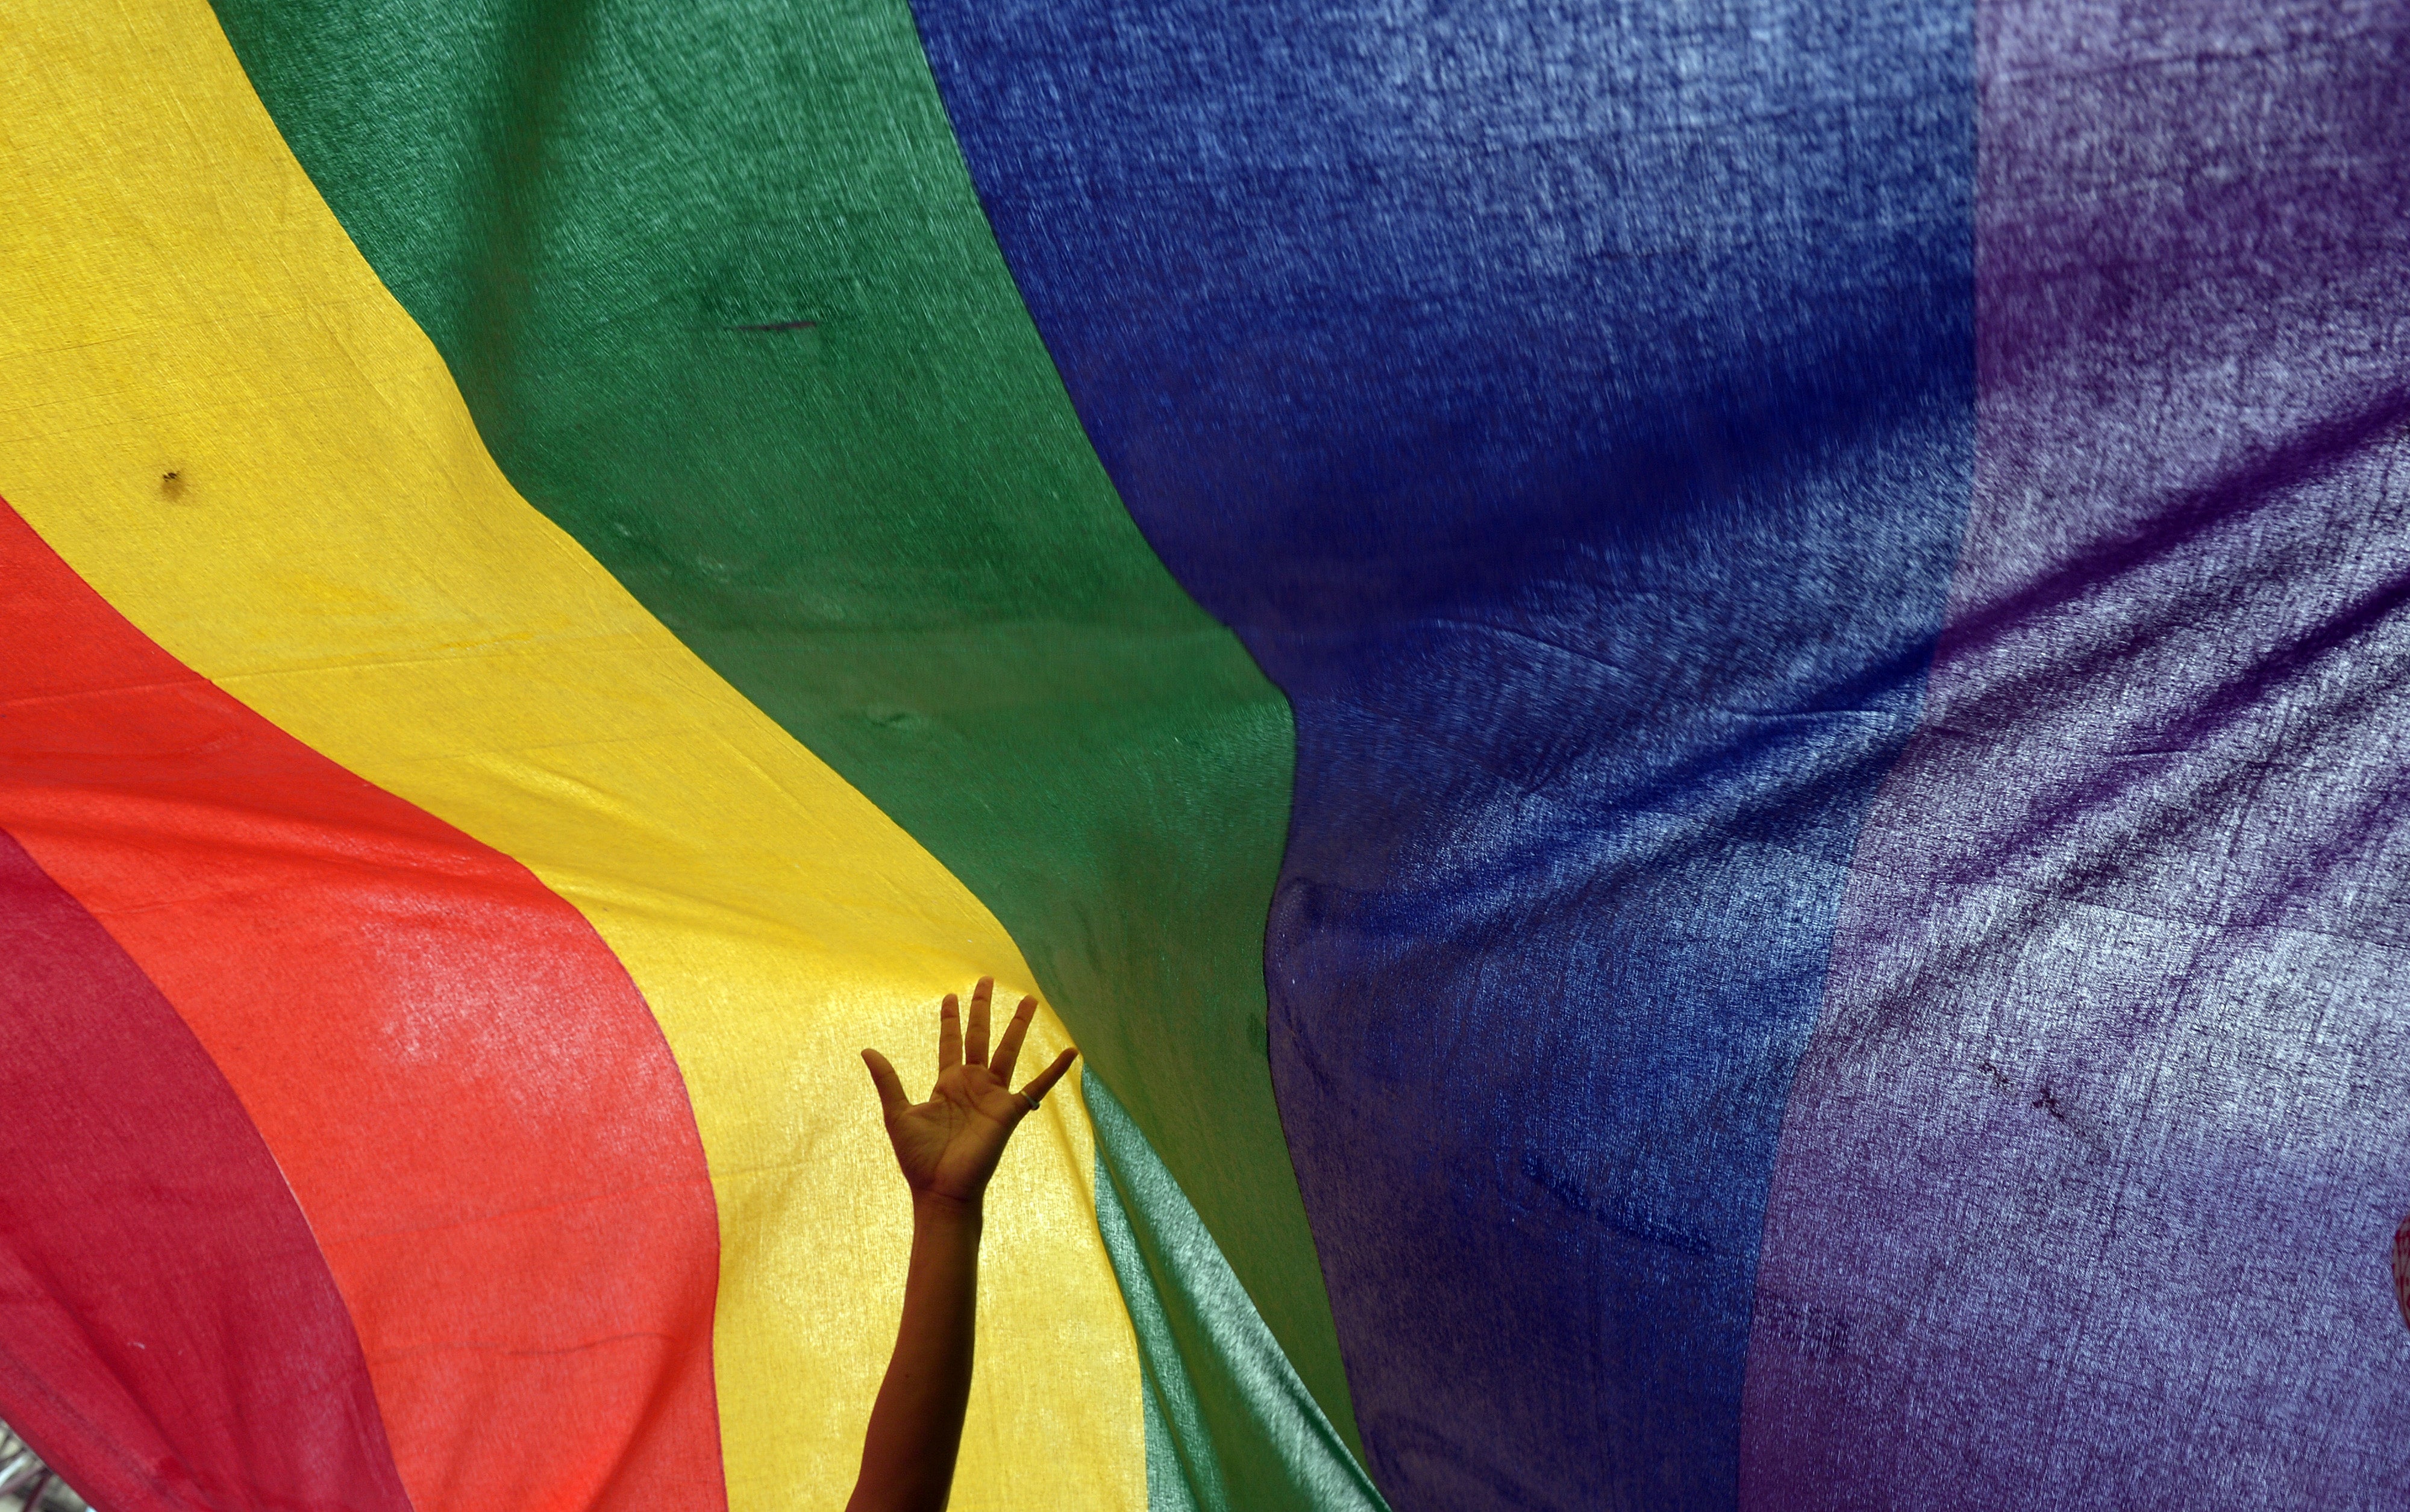 File Image: An Indian sexual minority community member gestures over a rainbow flag while participating in a Rainbow Pride Walk in Kolkata on 7 July 2013